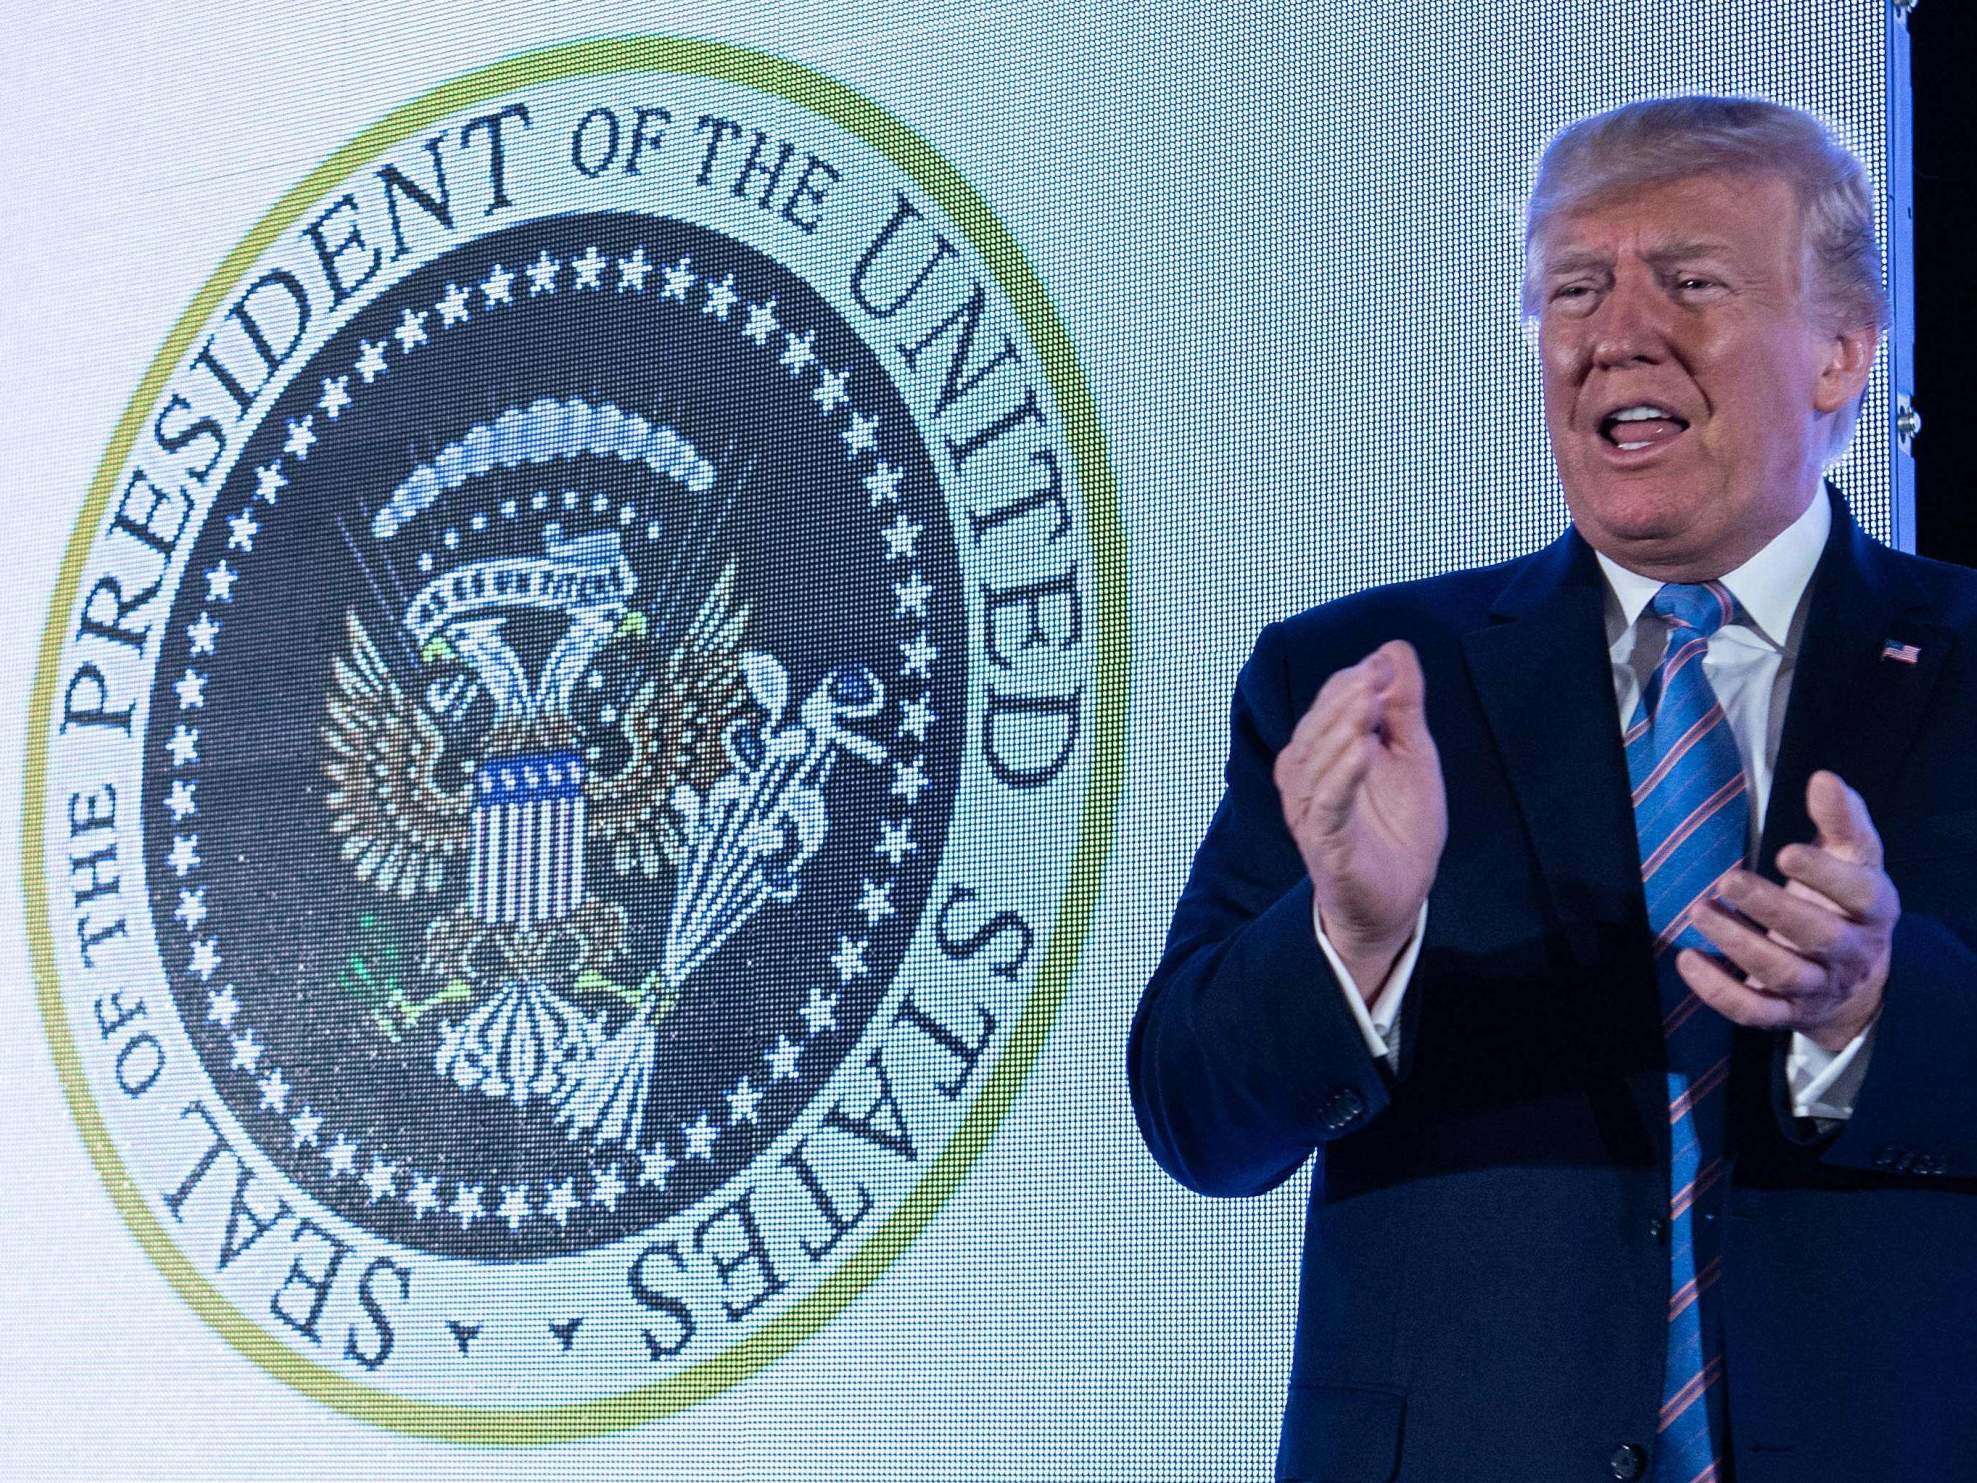 image for Trump speaks in front of fake presidential seal mysteriously manipulated to feature Russian eagles and golf clubs